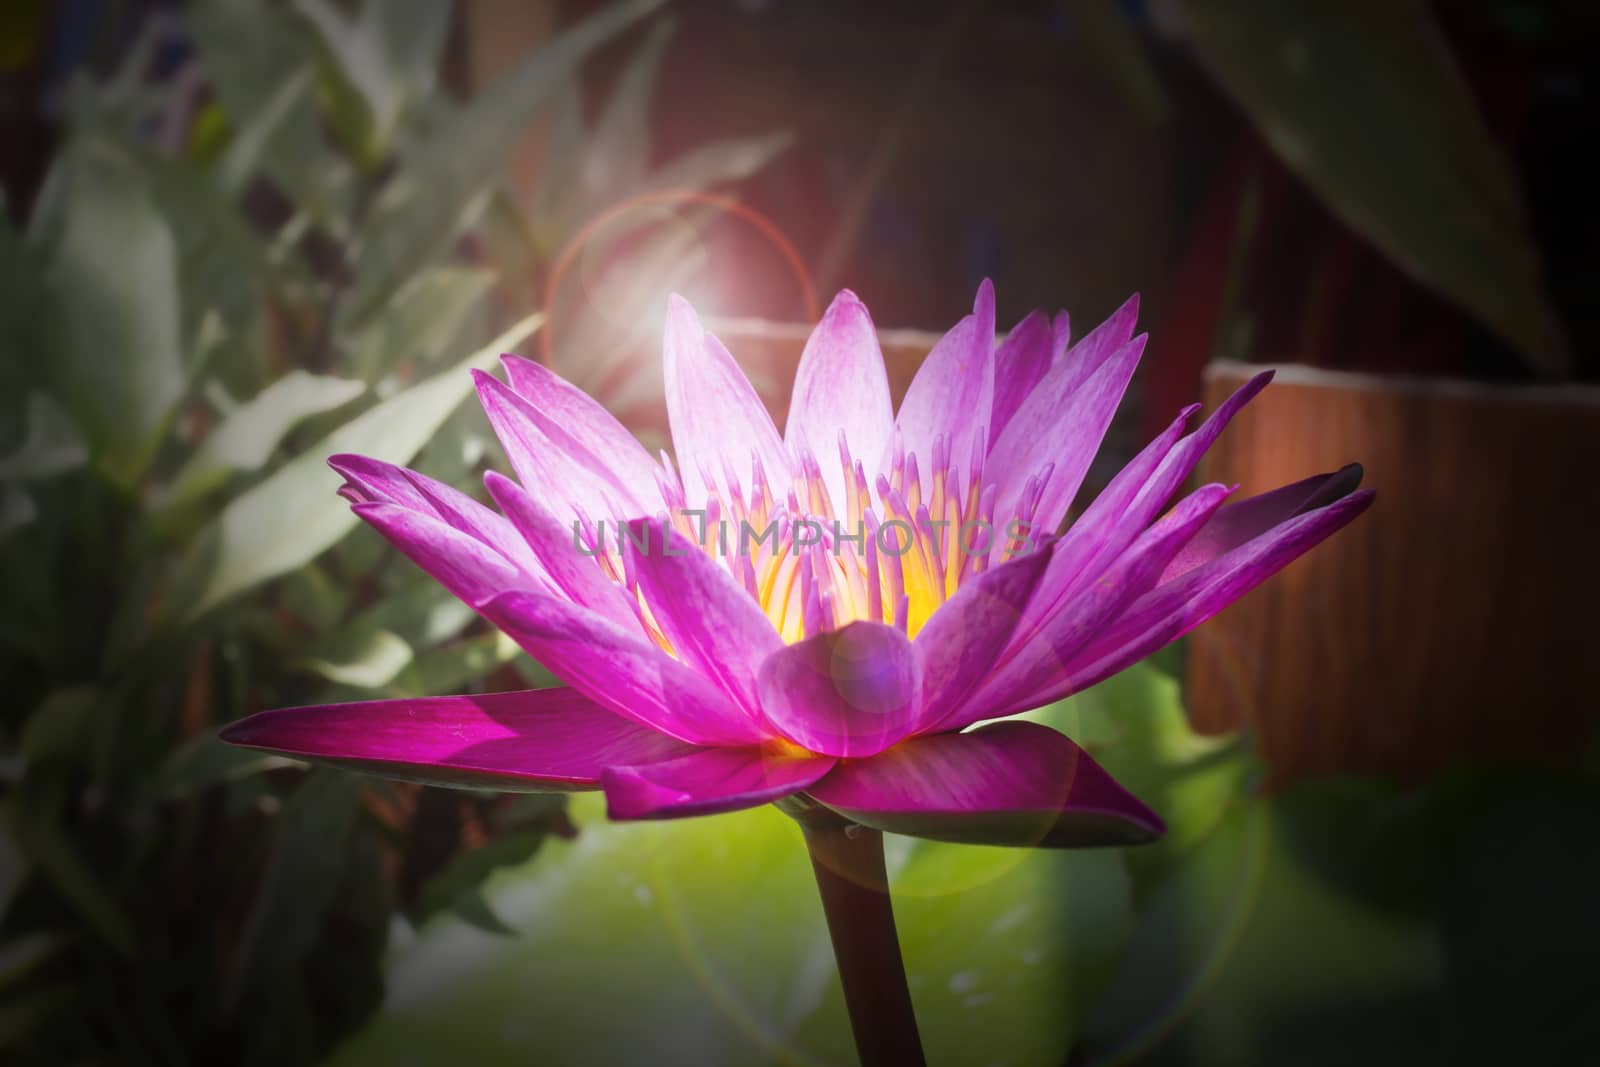 Beautiful blossom in darness, focused at pollen lotus flower with lensflare, fresh pink or violet blossom lotus flower in treeshade with sunlight